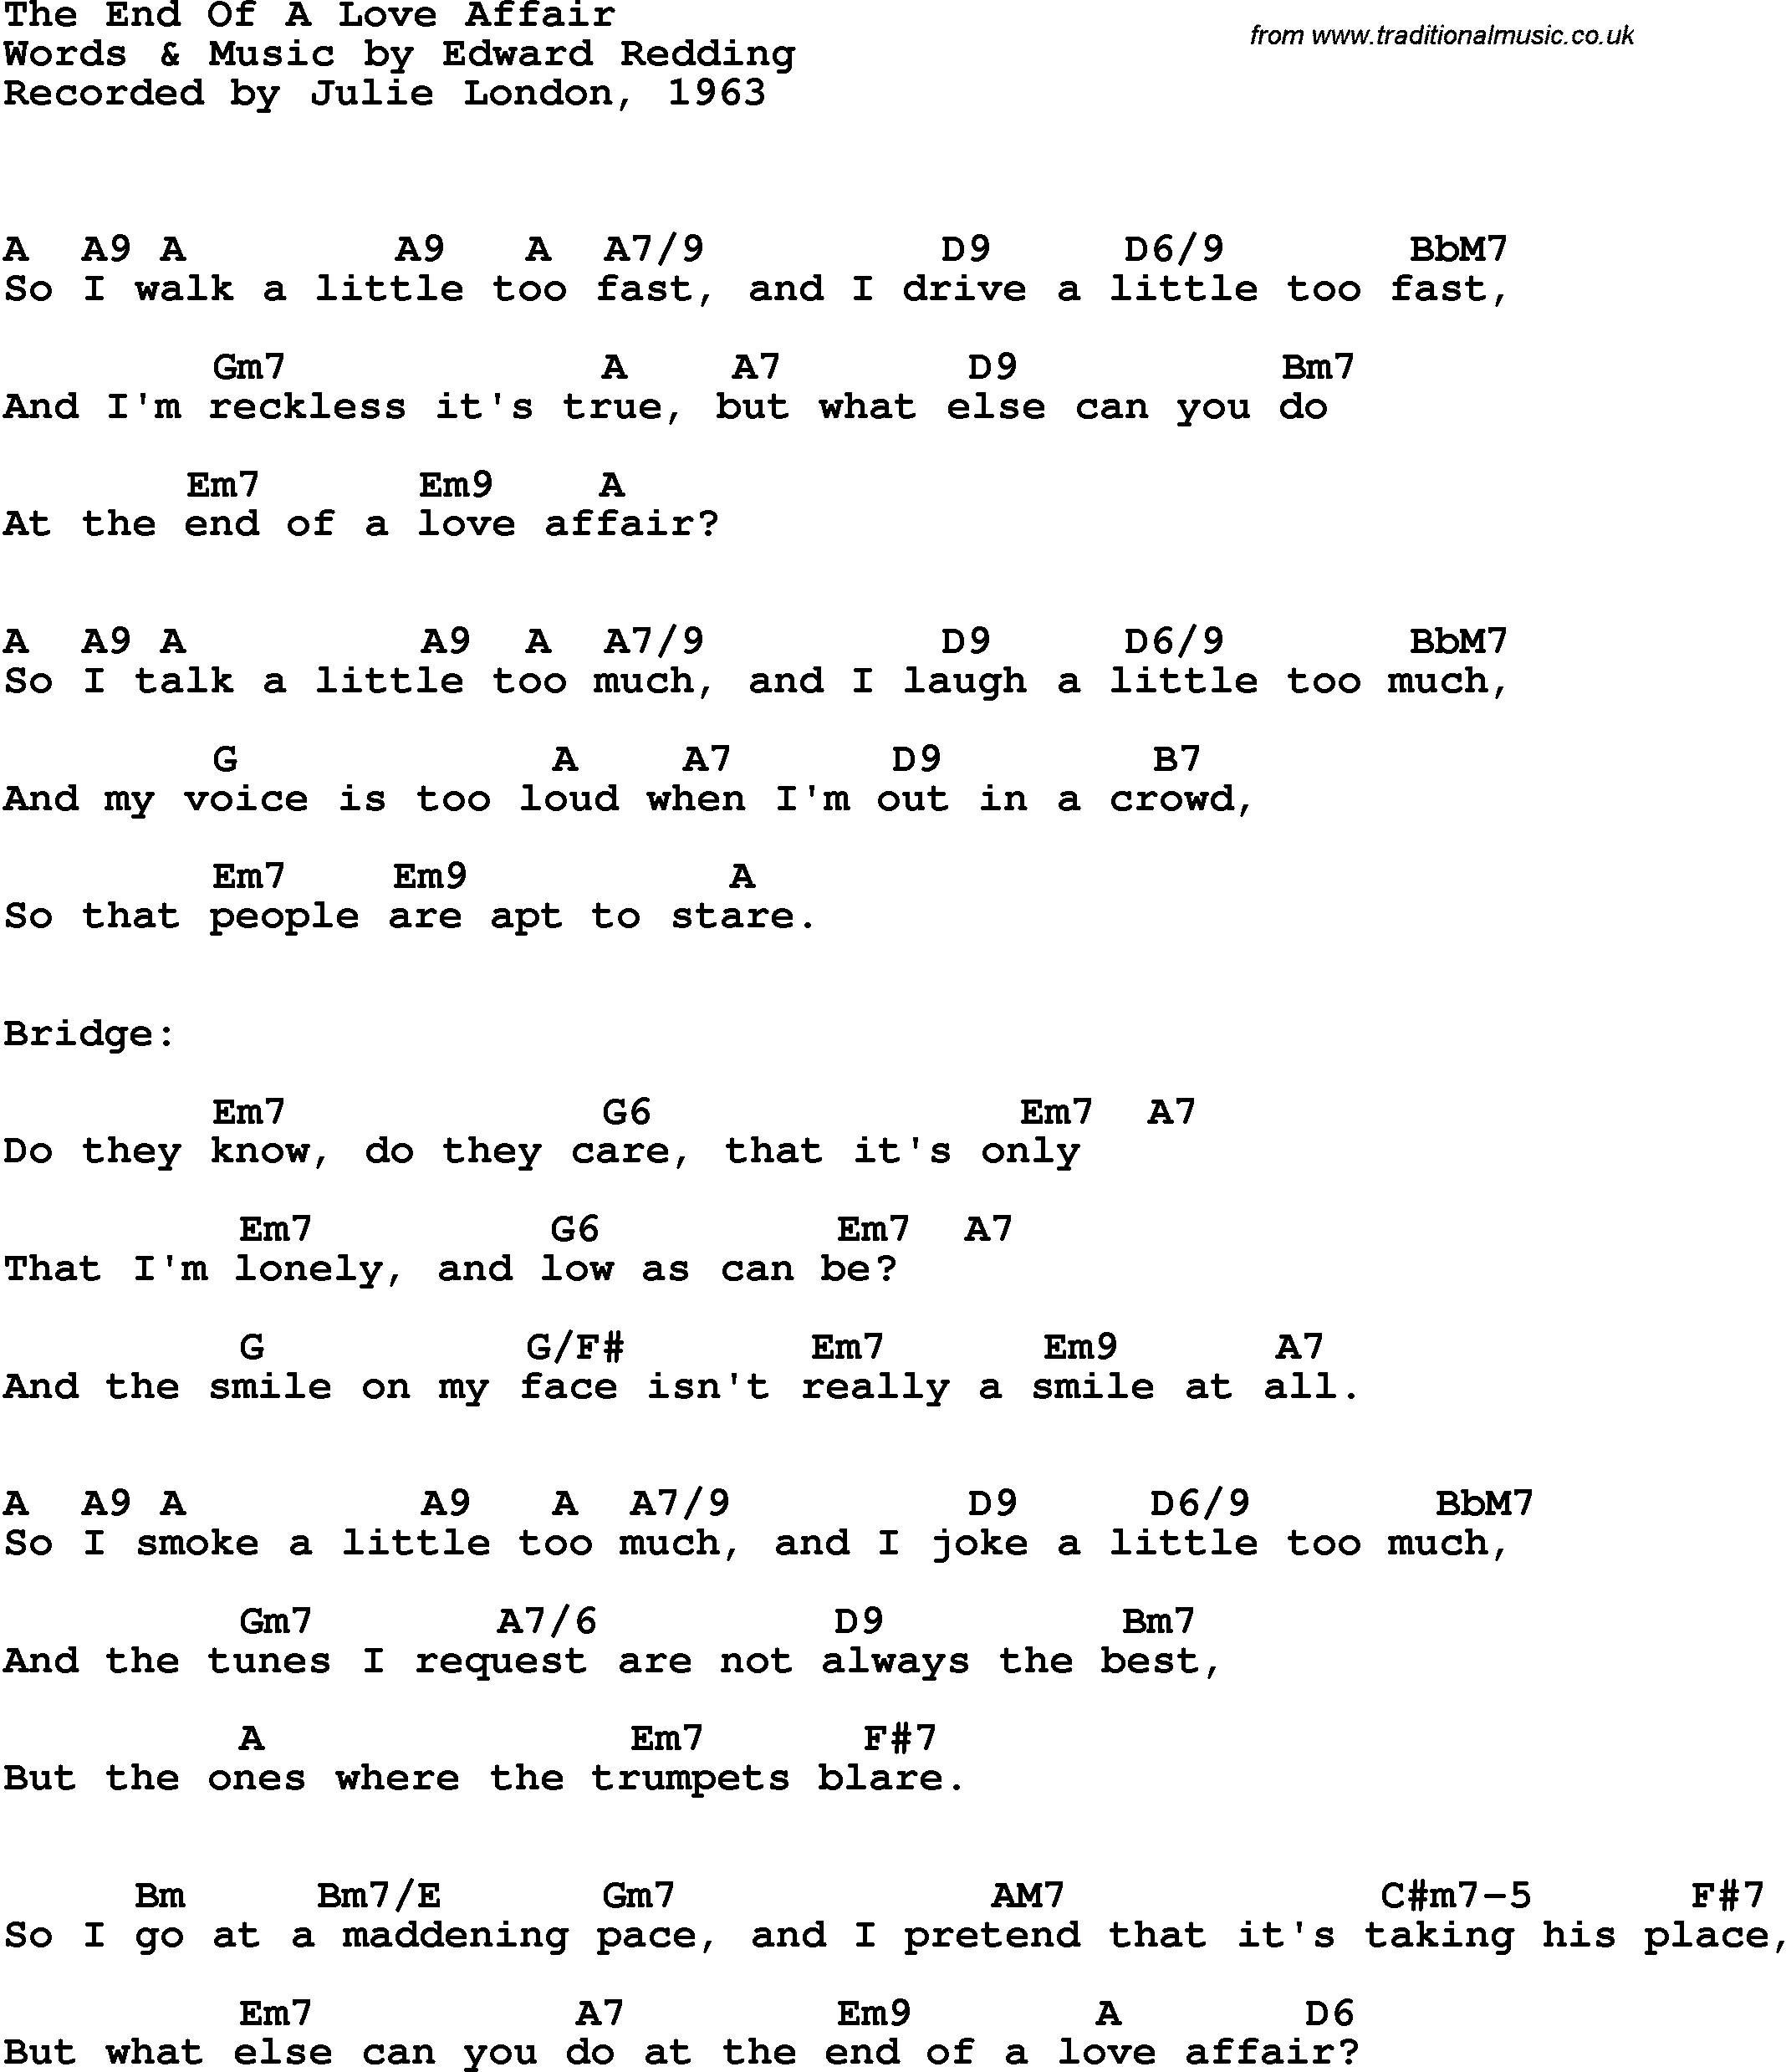 Song Lyrics with guitar chords for End Of A Love Affair, The -  Julie London, 1963